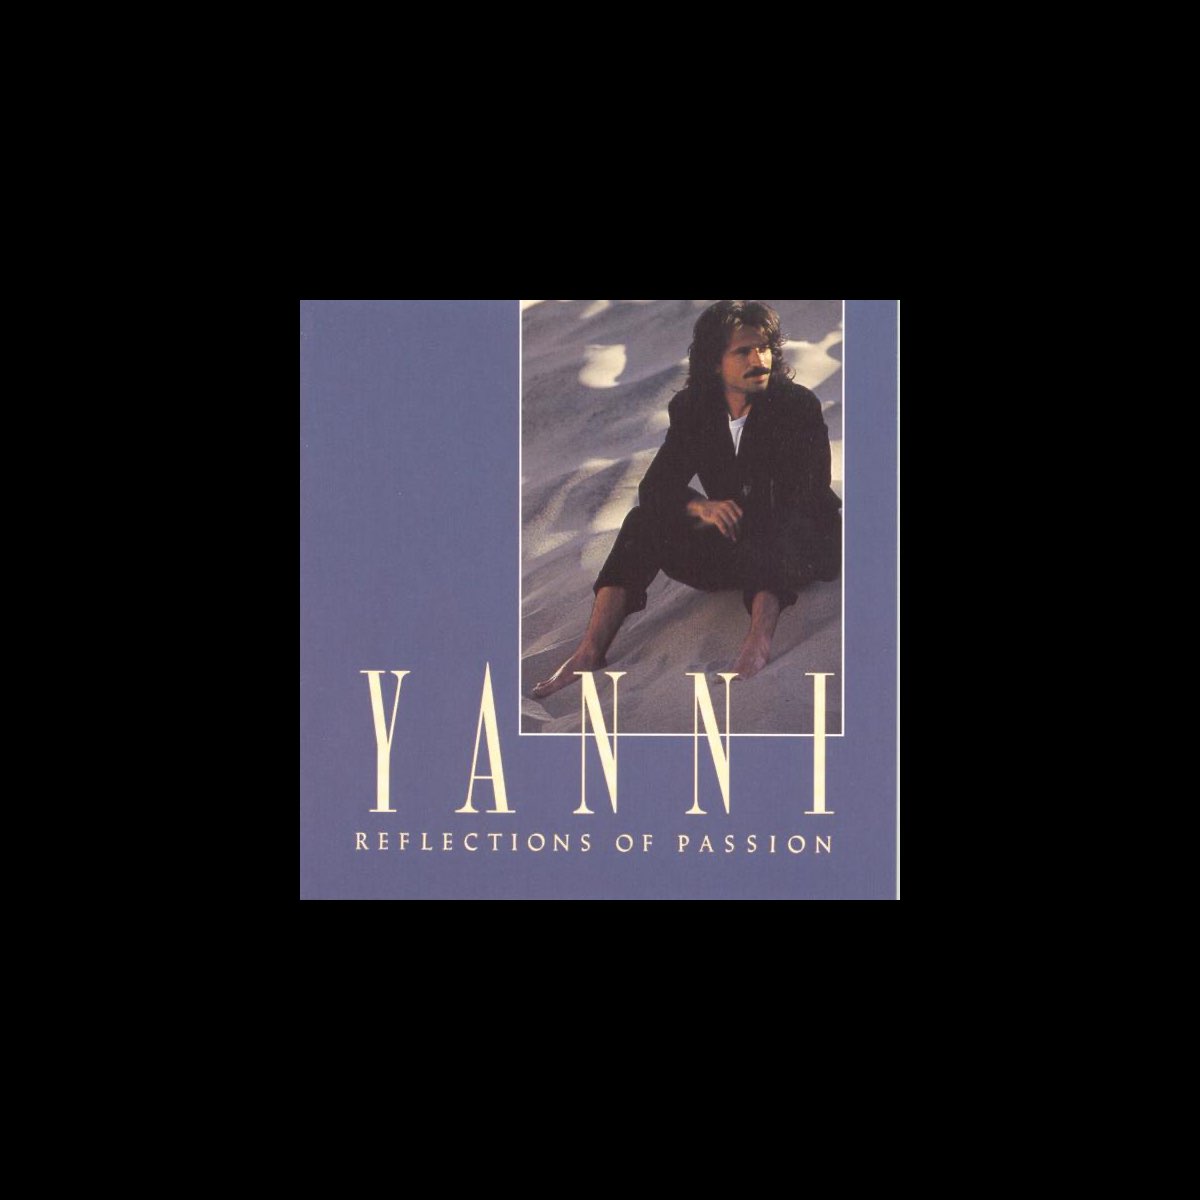 Reflections of Passion - Album by Yanni - Apple Music